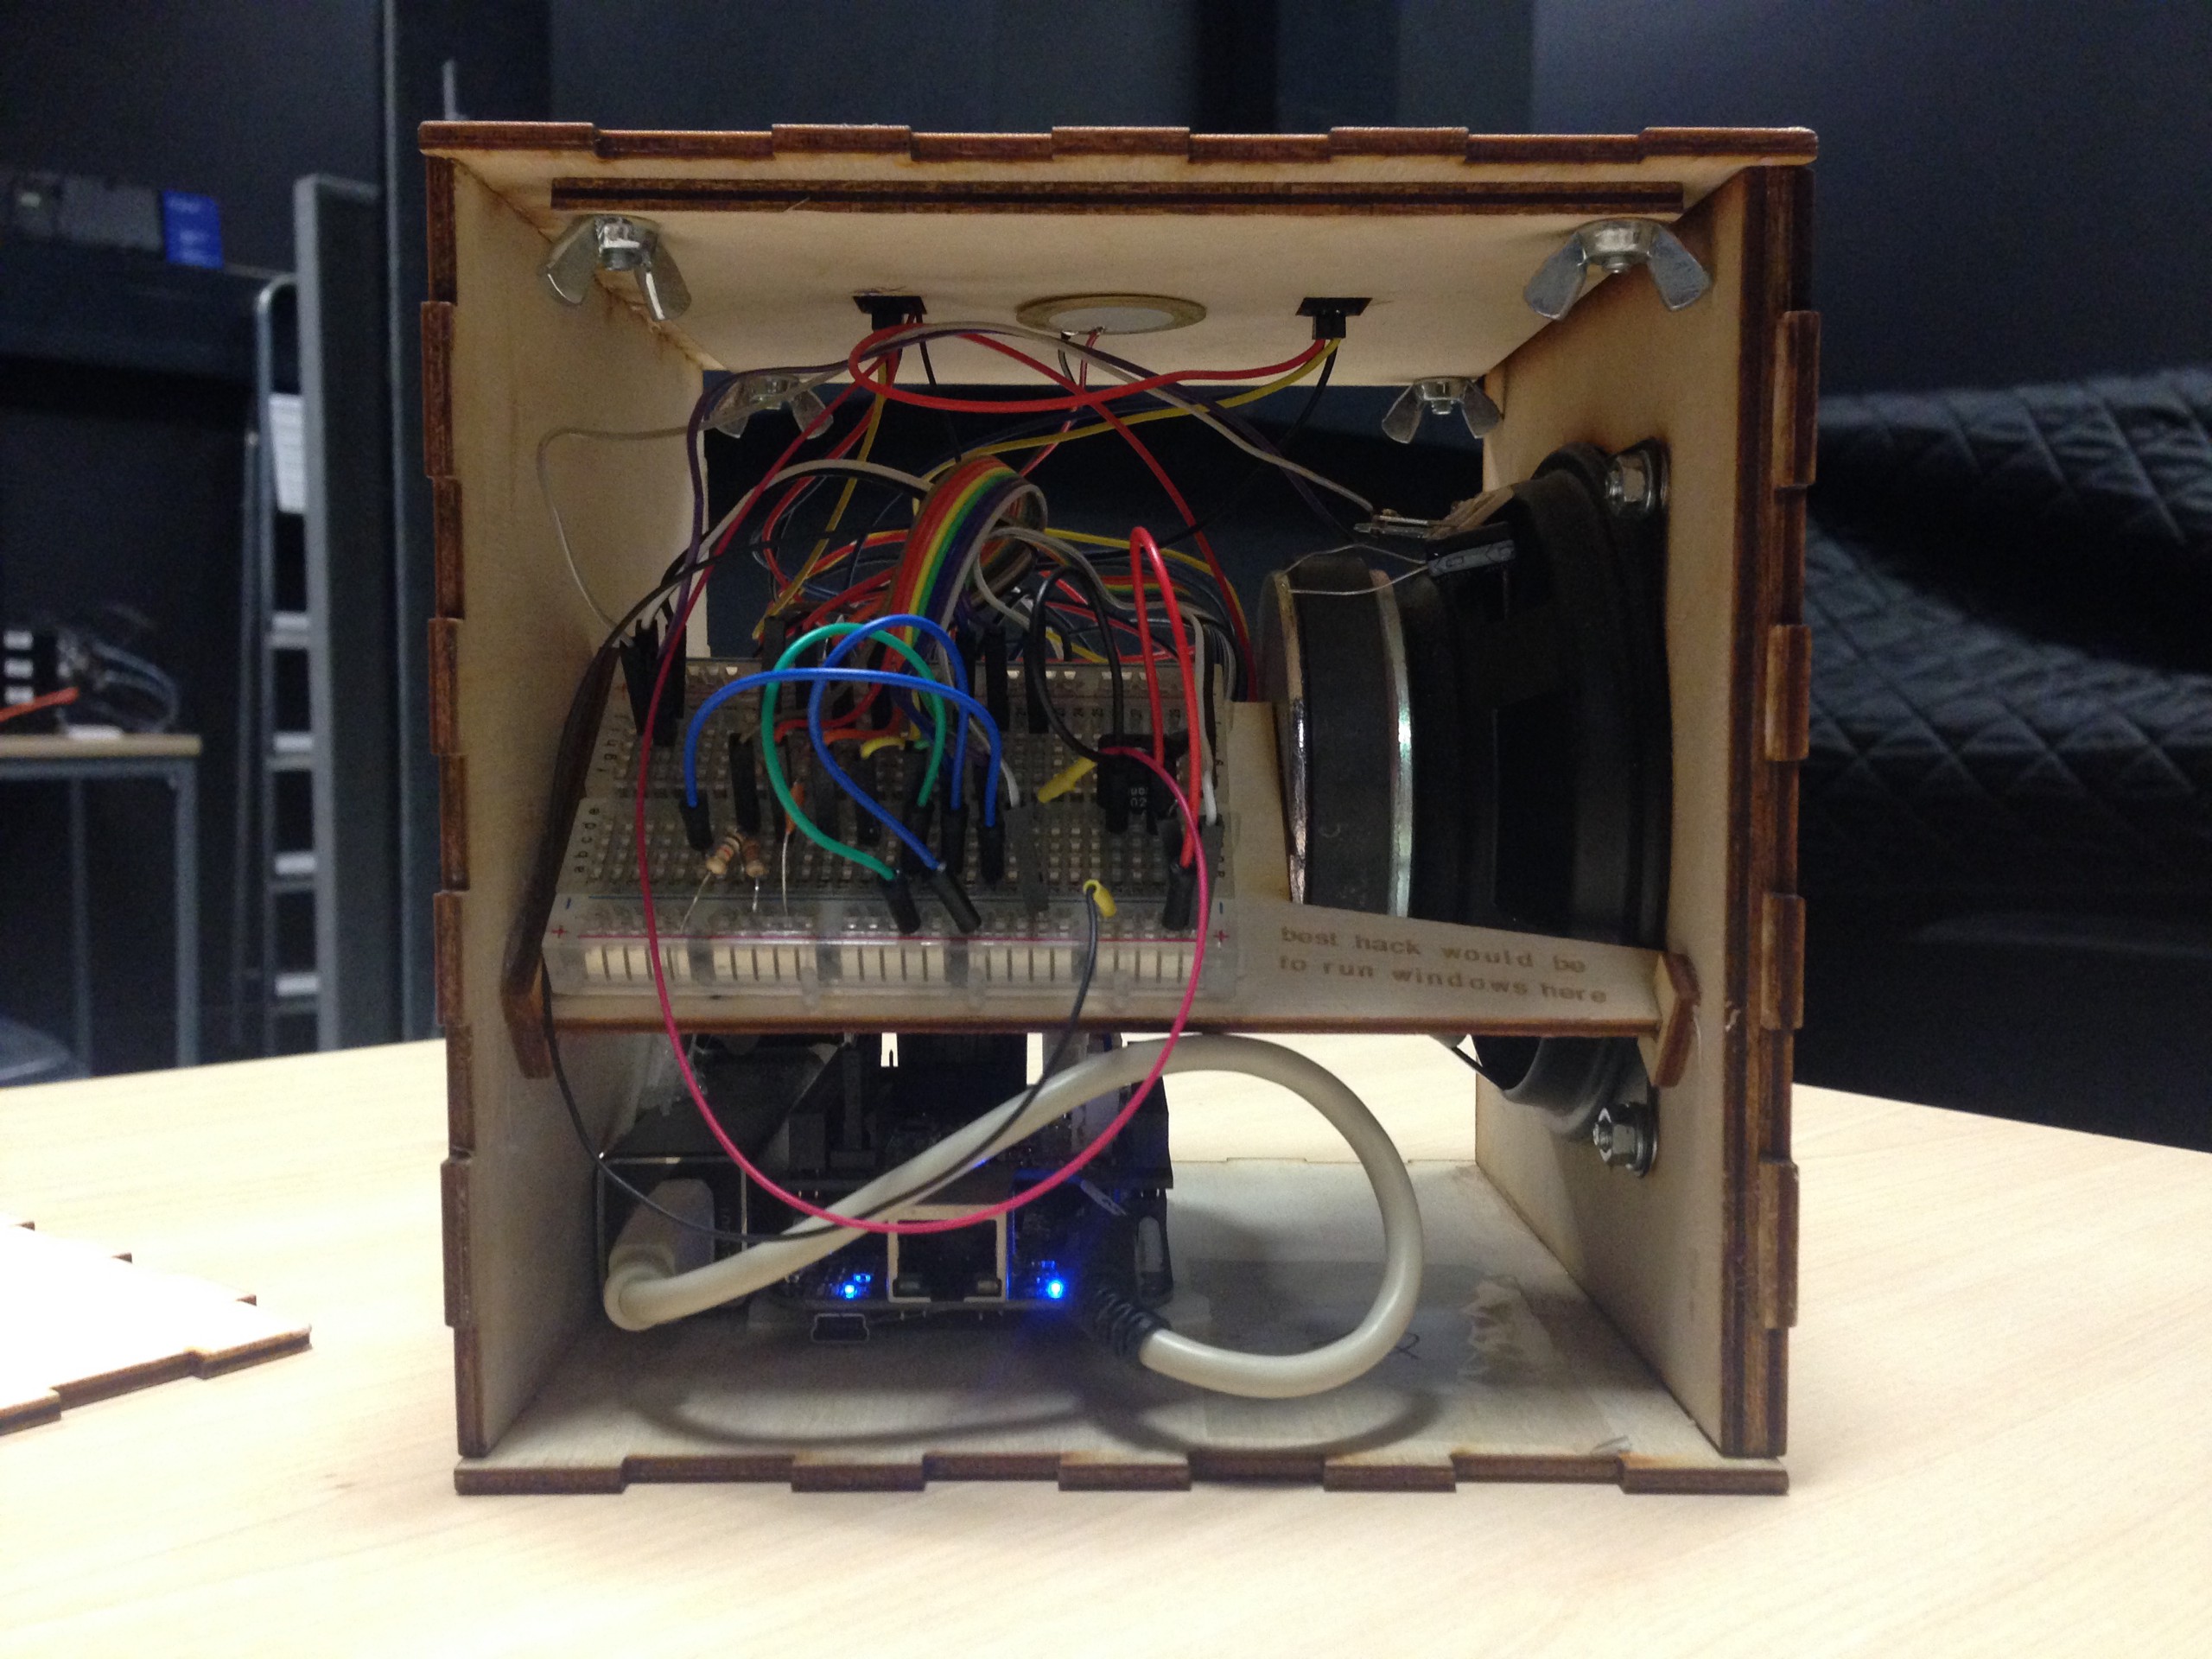 A wooden box speaker is open. Inside is a mess of wires and circuitry, connected to the speaker cone.